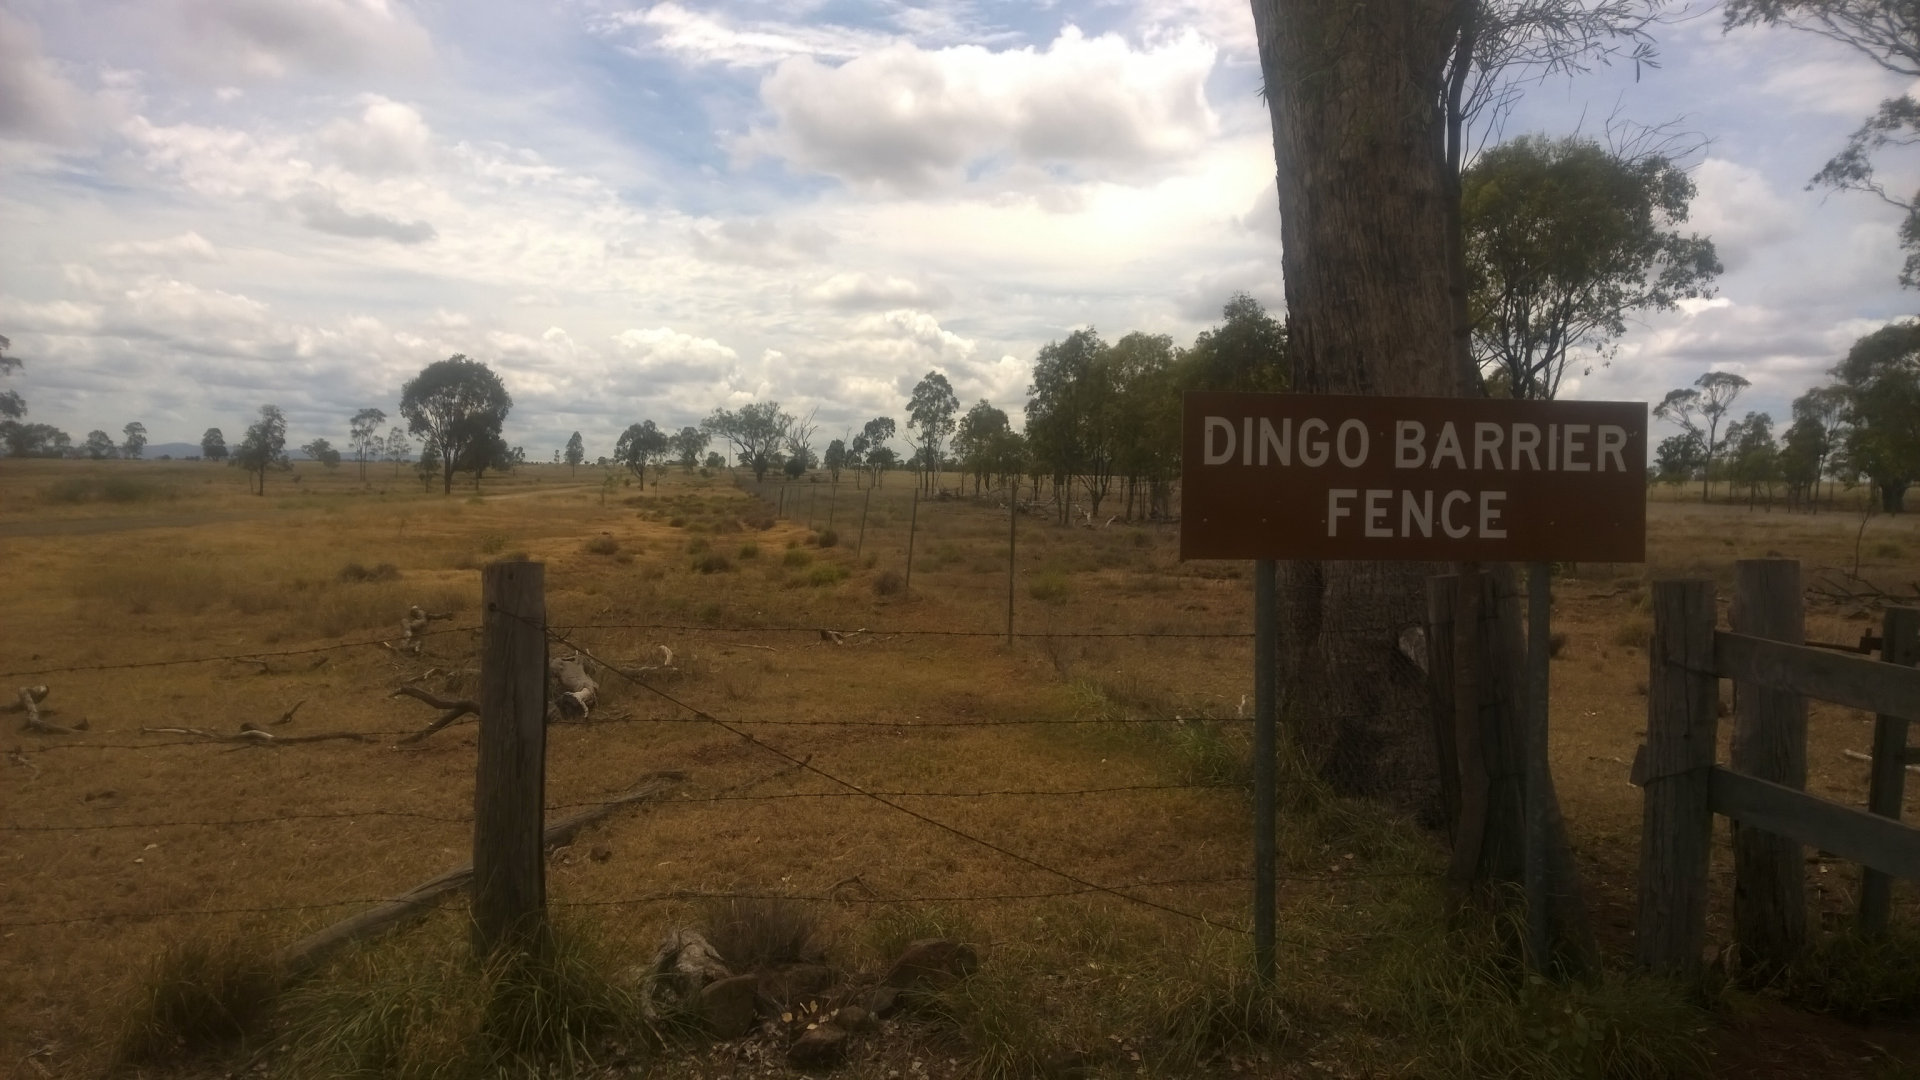 The start of the 5,600km Dingo Fence near Jandowae, ending in South Australia. Brown sign for Dingo Barrier Fence in the foreground